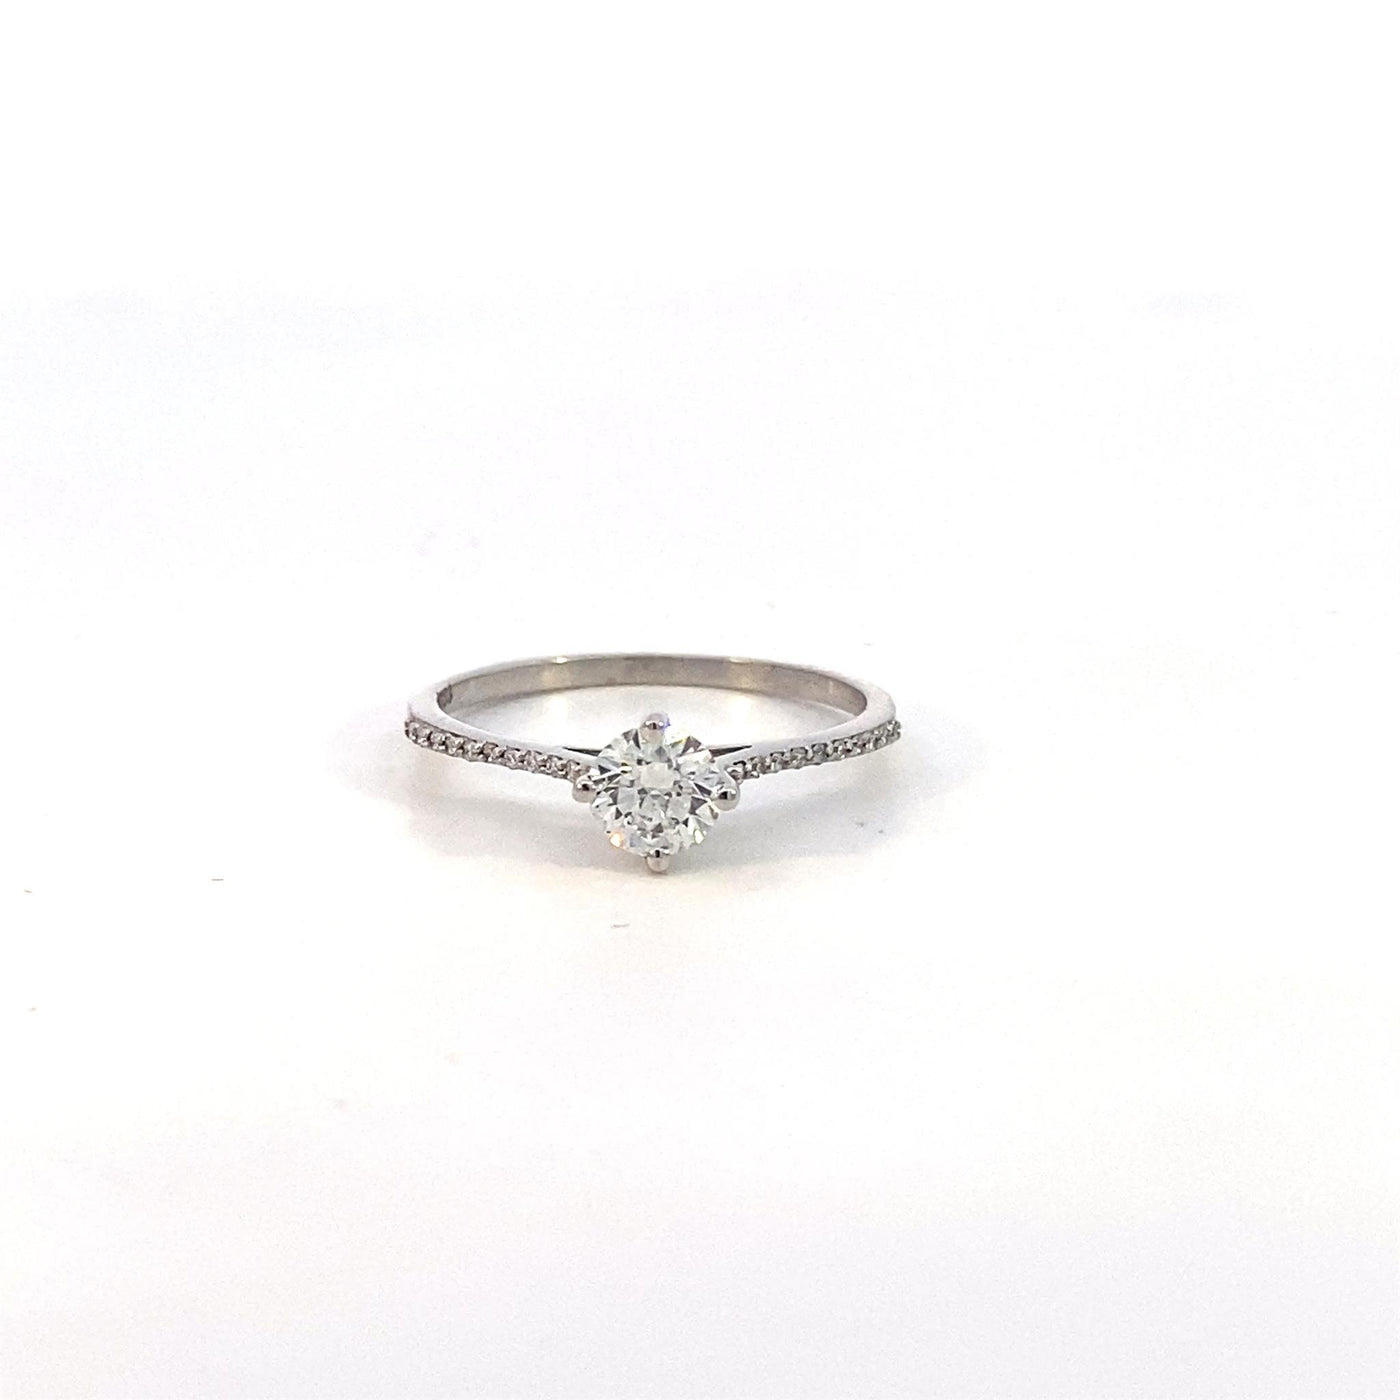 10K White Gold .48ctw 4 Prong Diamond Engagement Ring by Estate